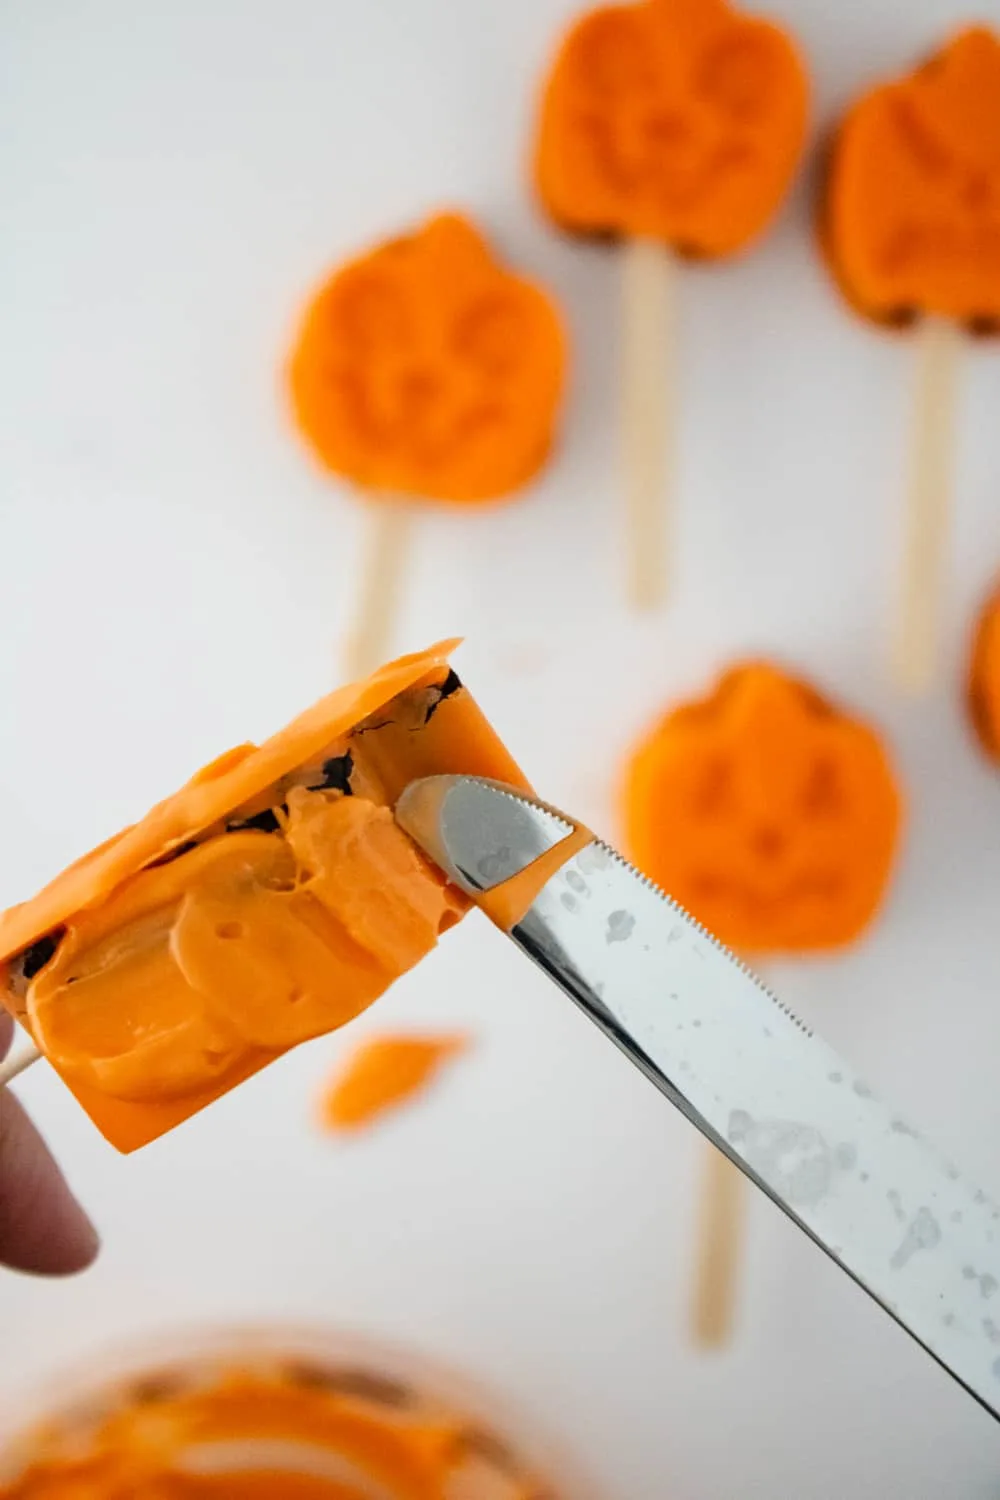 Fixing any missing chocolate on the edges of the pumpkin cake pops.